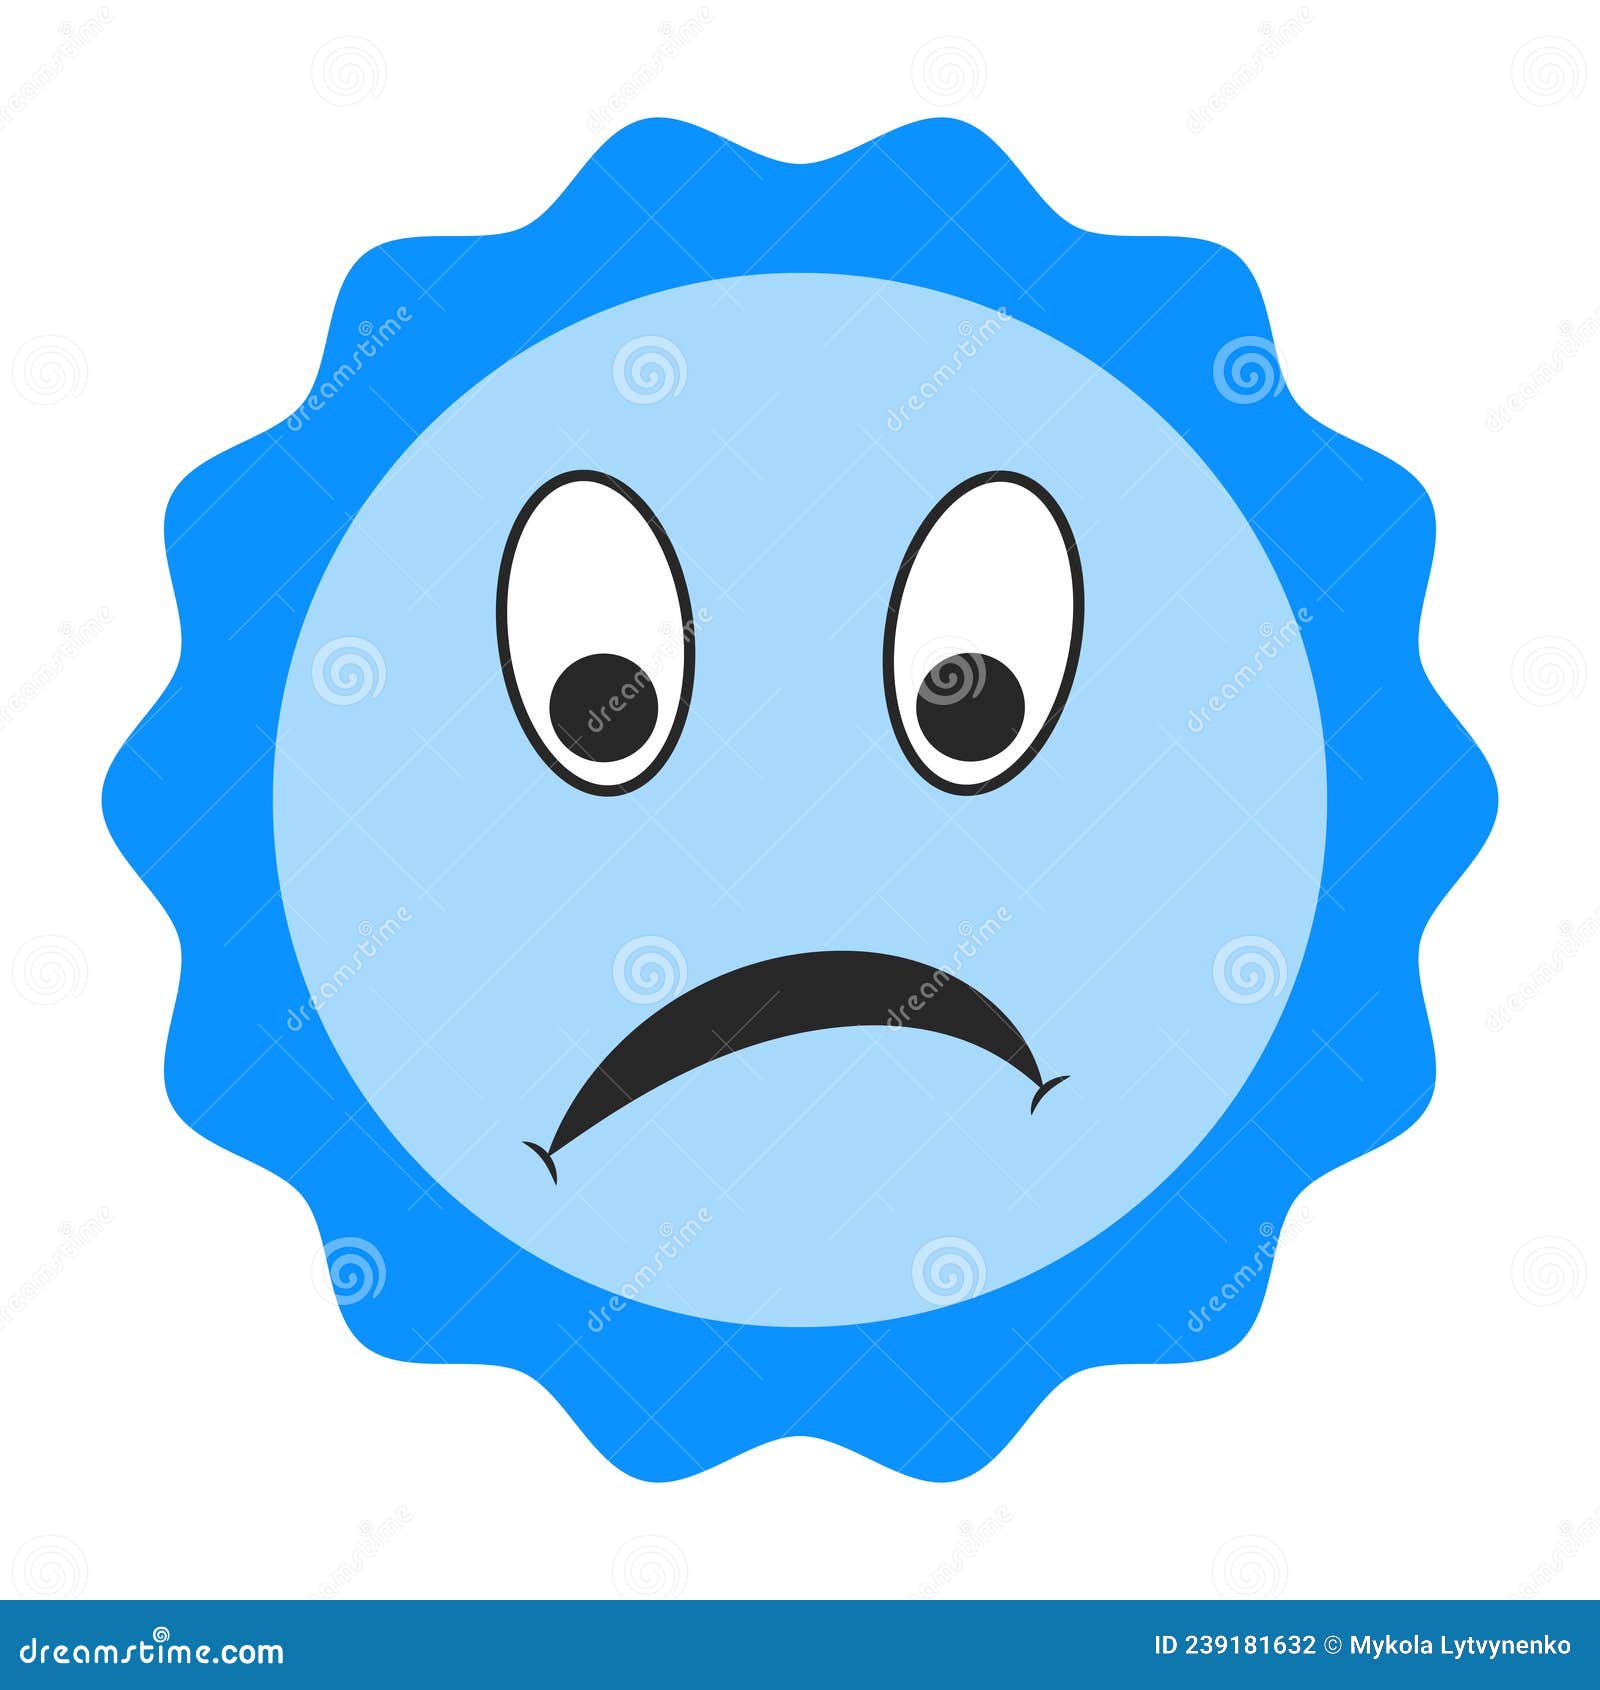 All 104+ Images unhappy emotion represented by the color blue Full HD, 2k, 4k